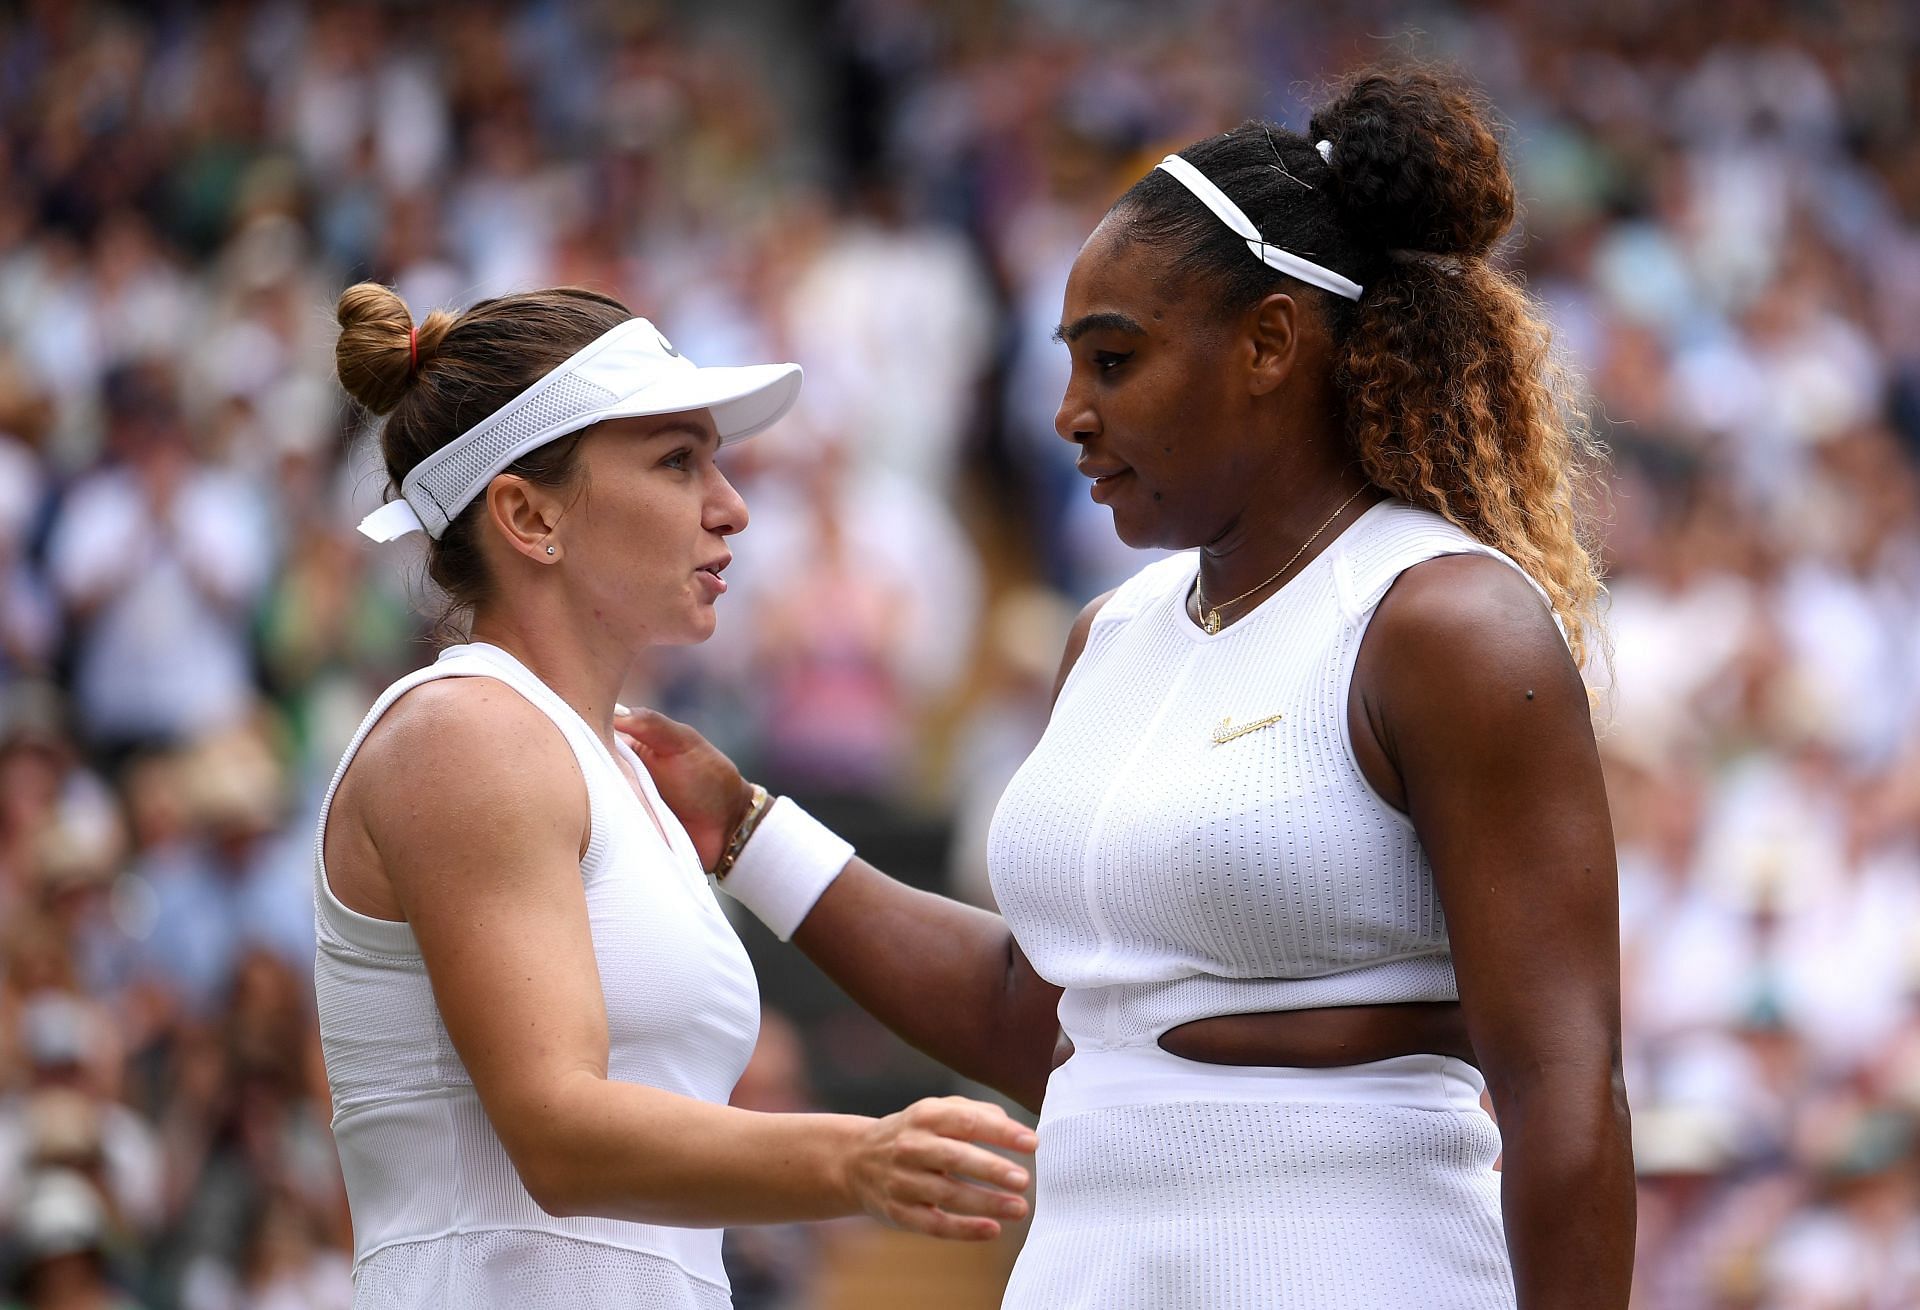 Williams will be looking to avenge her 2019 Wimbledon loss to Simona Halep